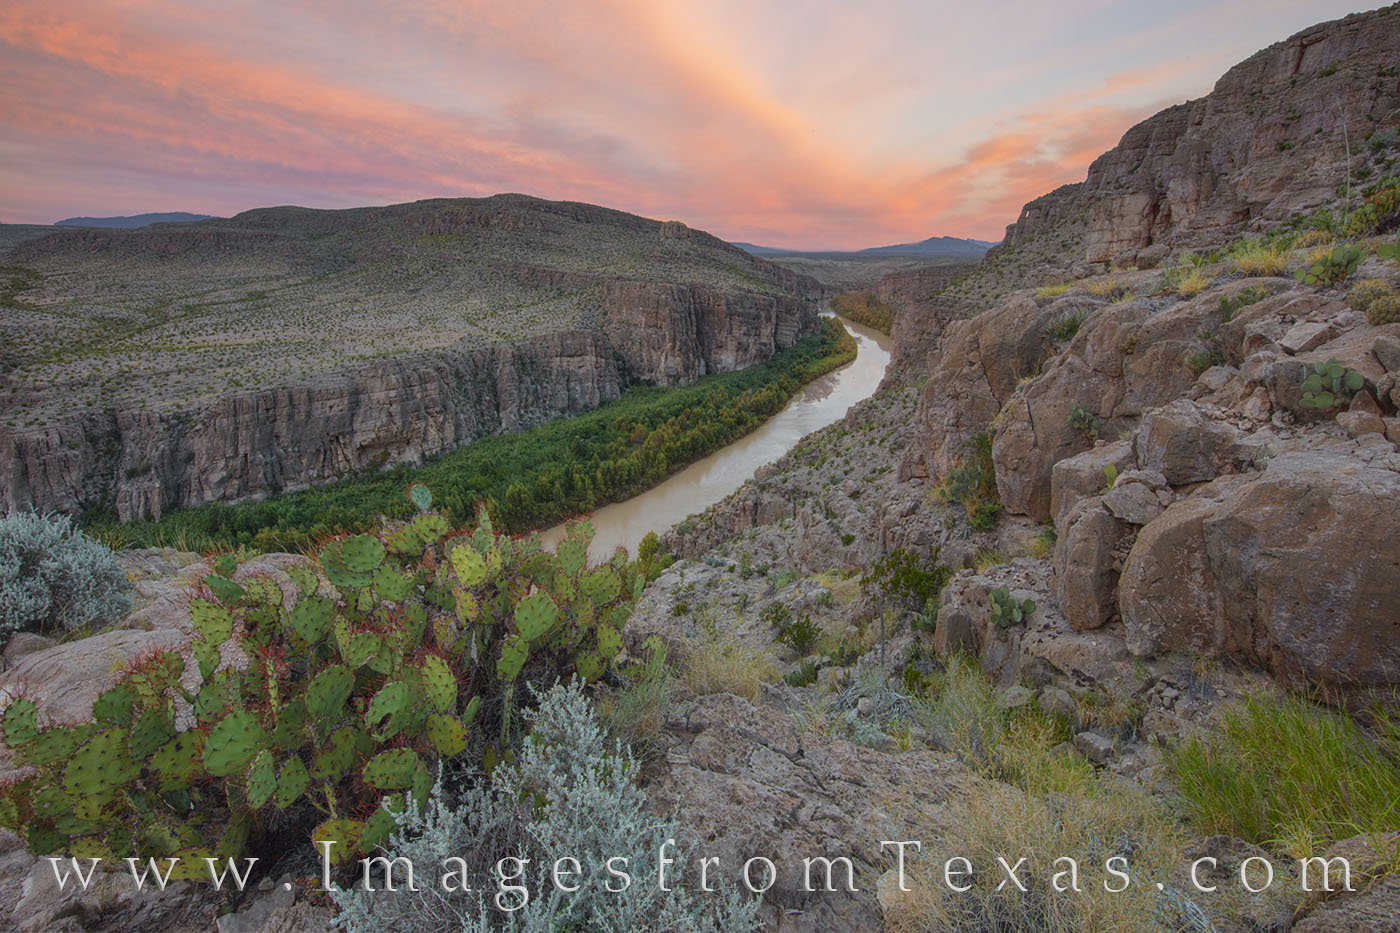 From a vantage point just off the Hot Springs Trail in Big Bend National Park, this is sunrise along the Rio Grande. The views...